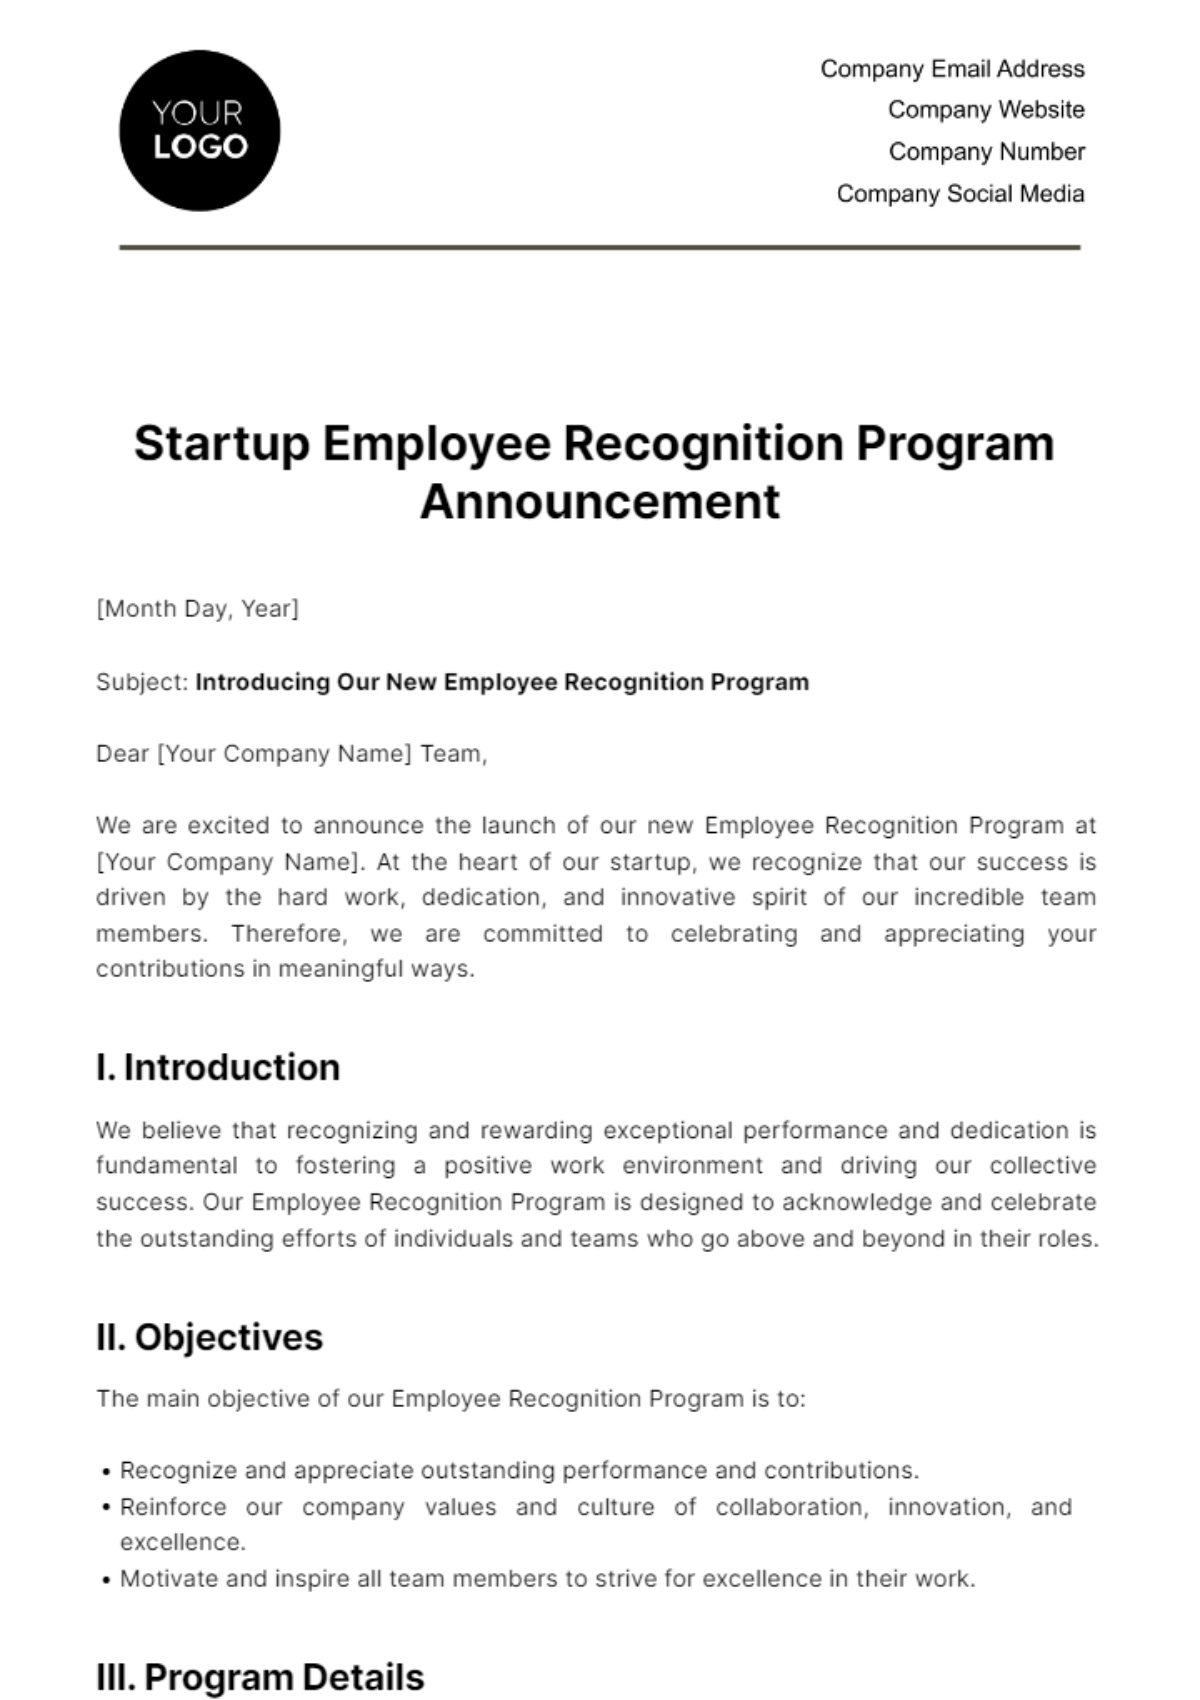 Free Startup Employee Recognition Program Announcement Template